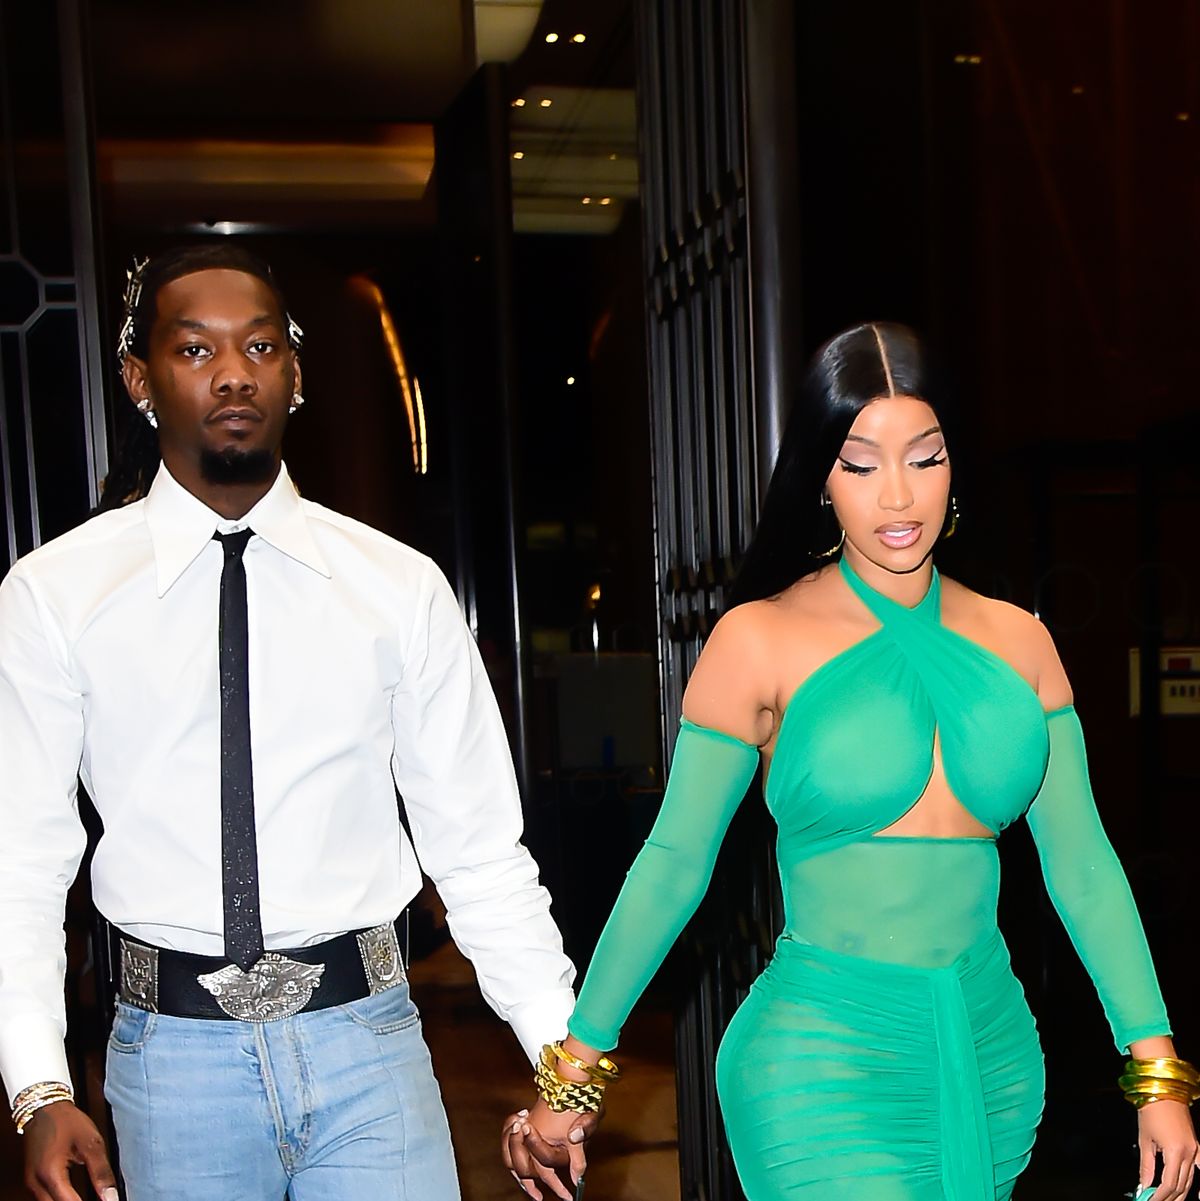 Cardi B, Offset 'not together' but did have sex New Year's Eve